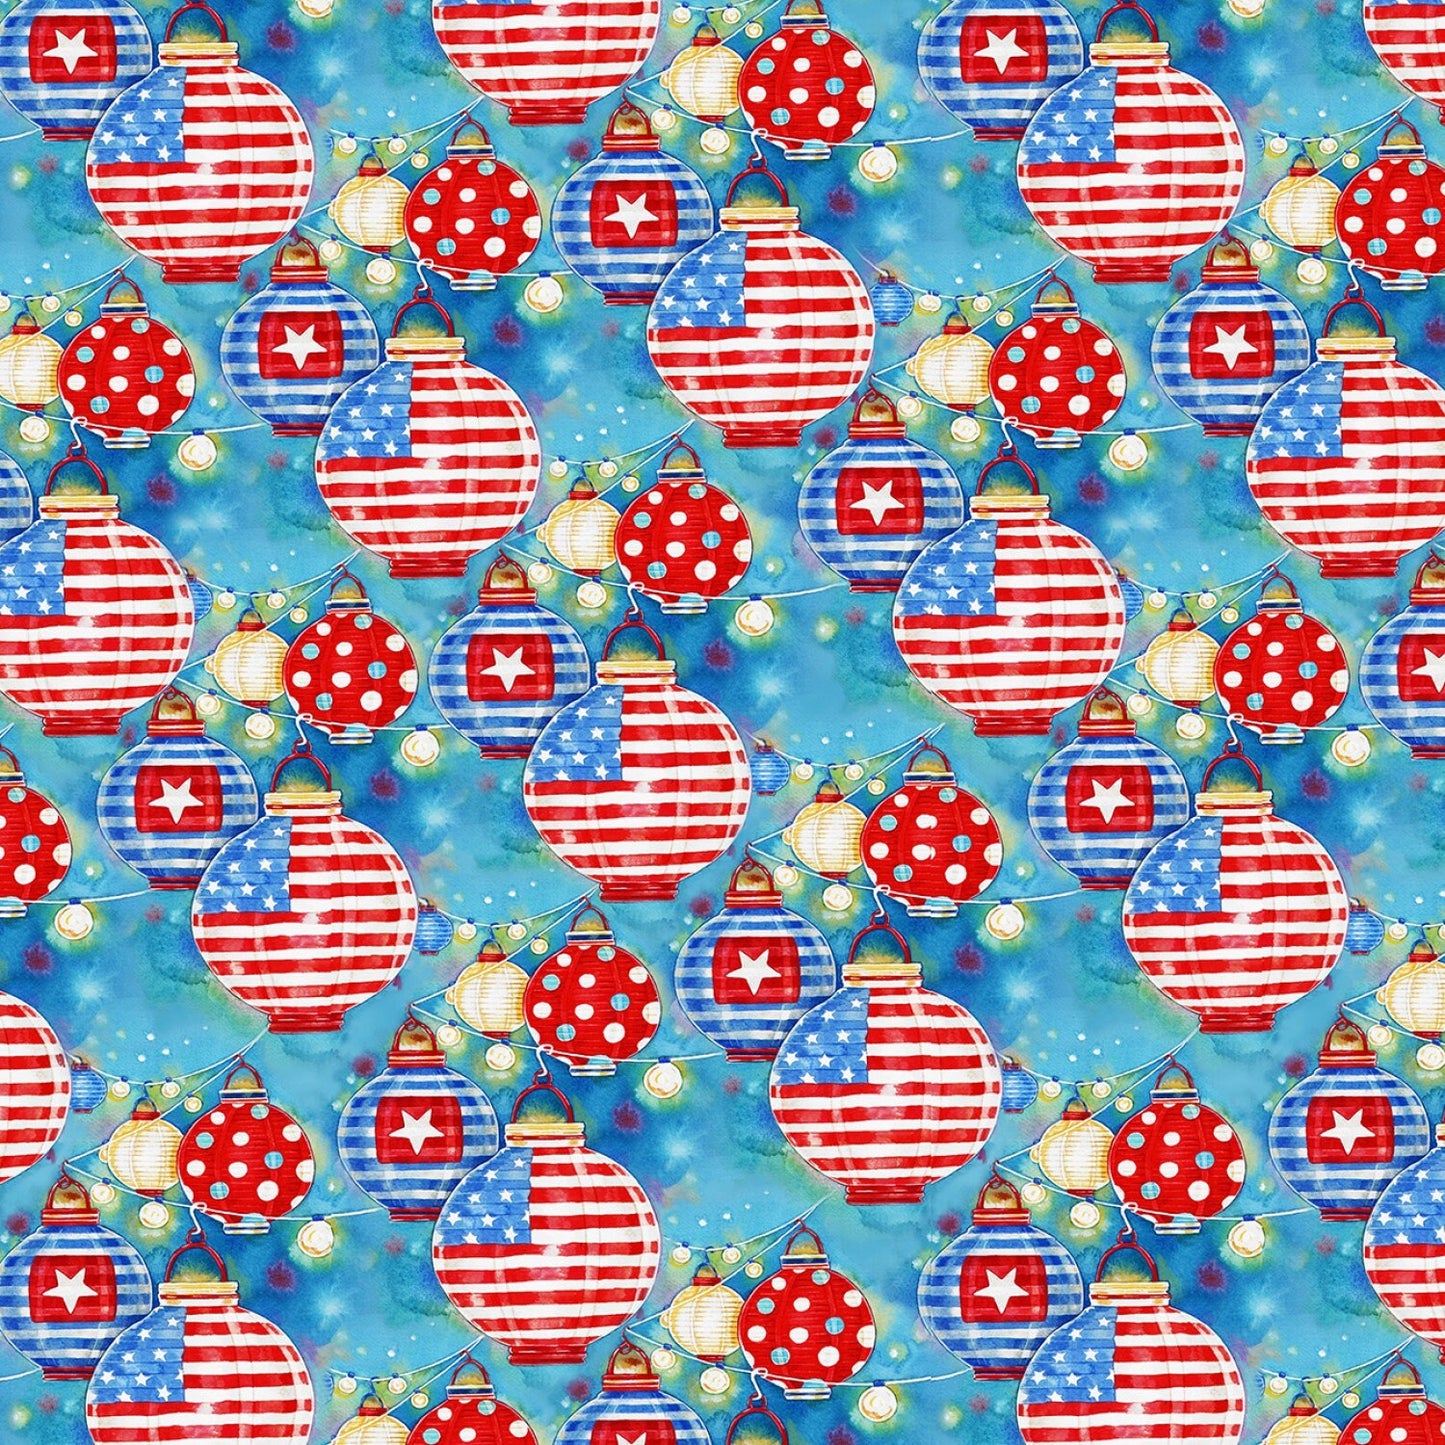 Star Spangled Summer by Andrea Tachiera Lanterns 9032-77 Cotton Woven Fabric